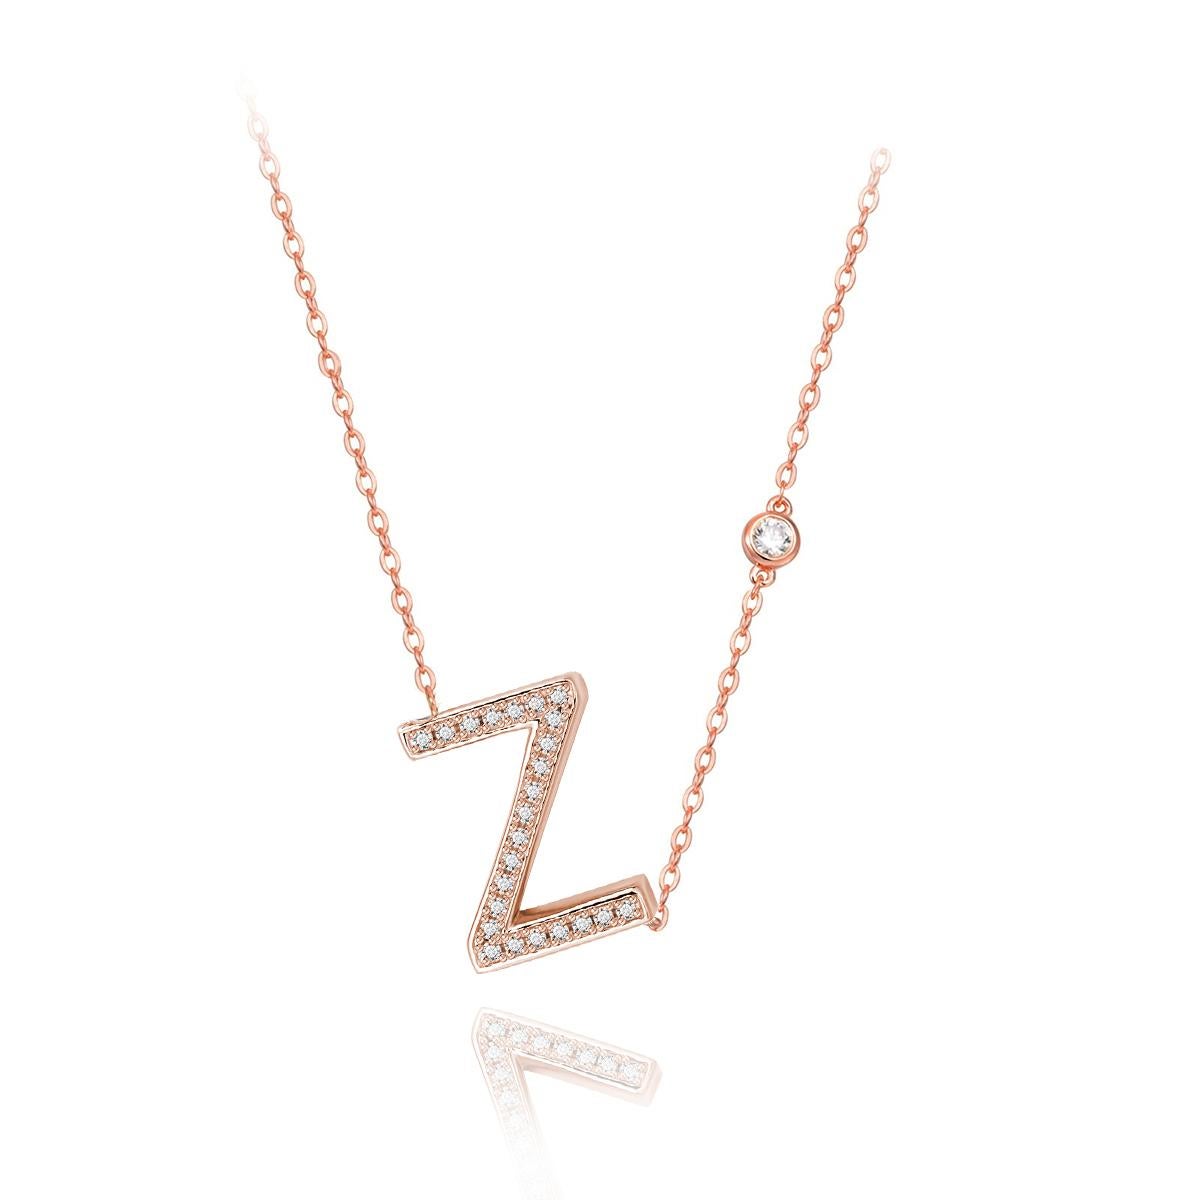 Nothing says YOU more than YOU. You are unique. You are bold. You're not afraid to share who you are. This initial bezel chain necklace is elegantly slimline while sharing a little bit about yourself with others. .925 sterling silver base also